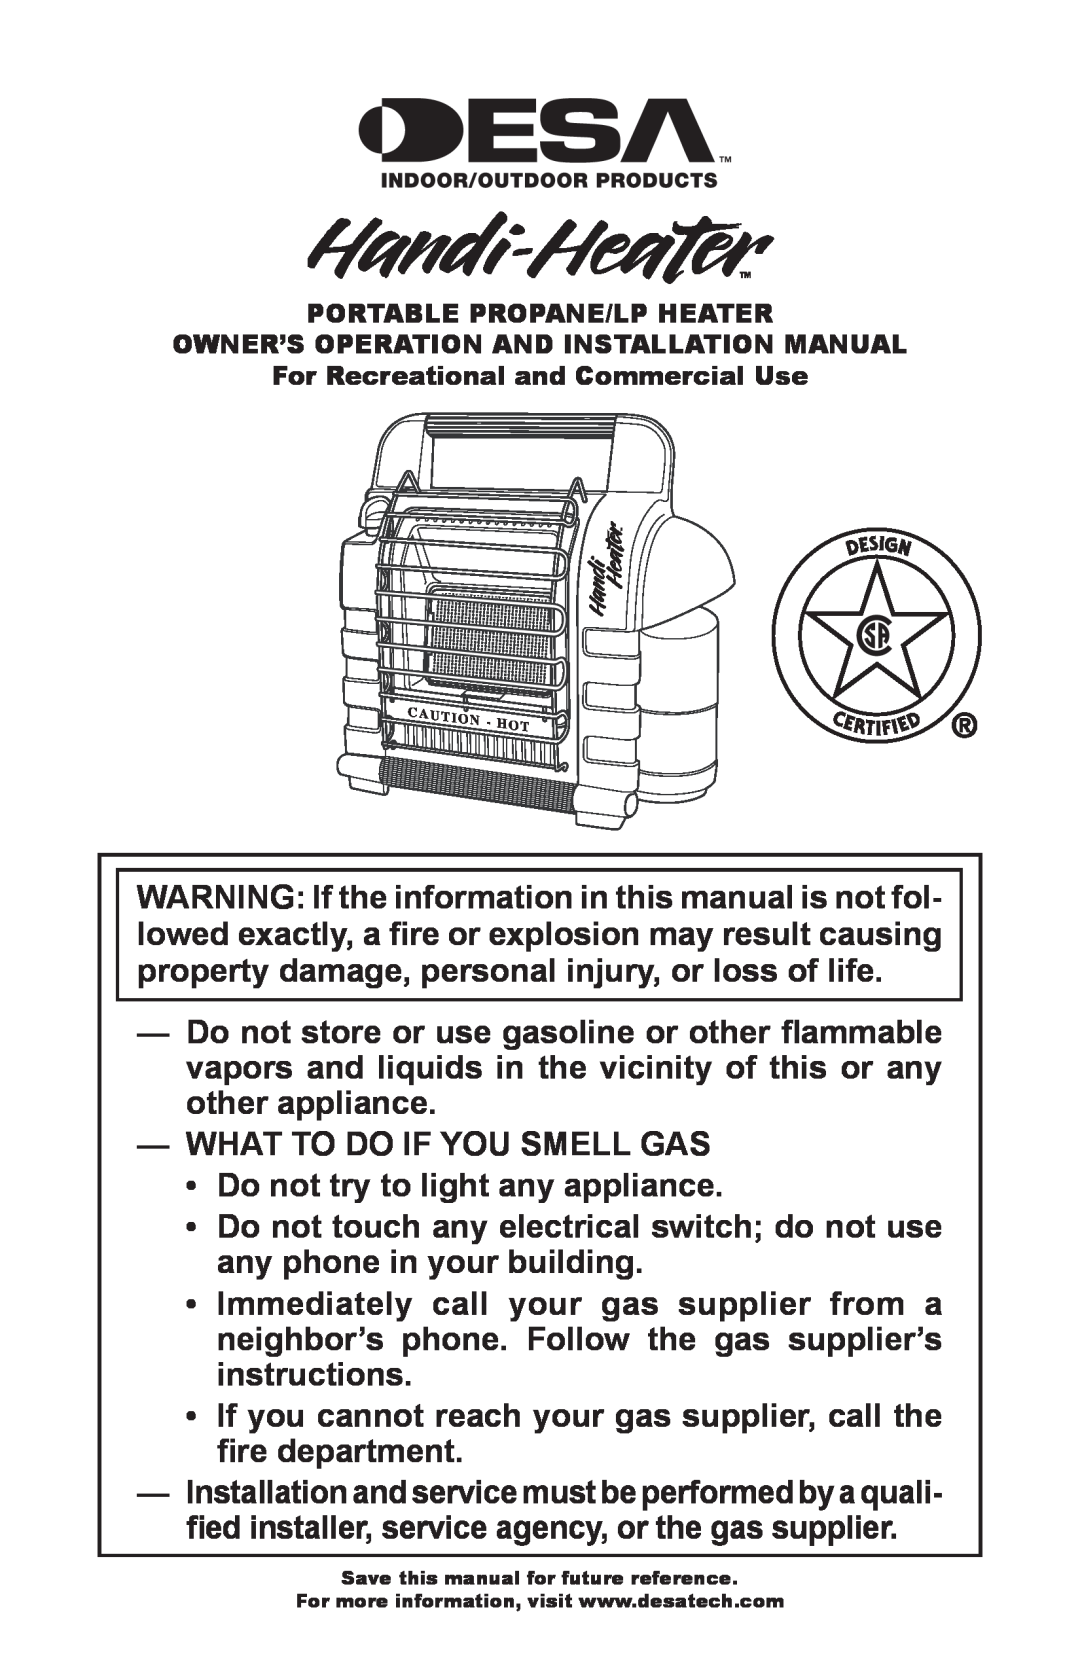 Desa PORTABLE PROPANE/LP HEATER installation manual What To Do If You Smell Gas 